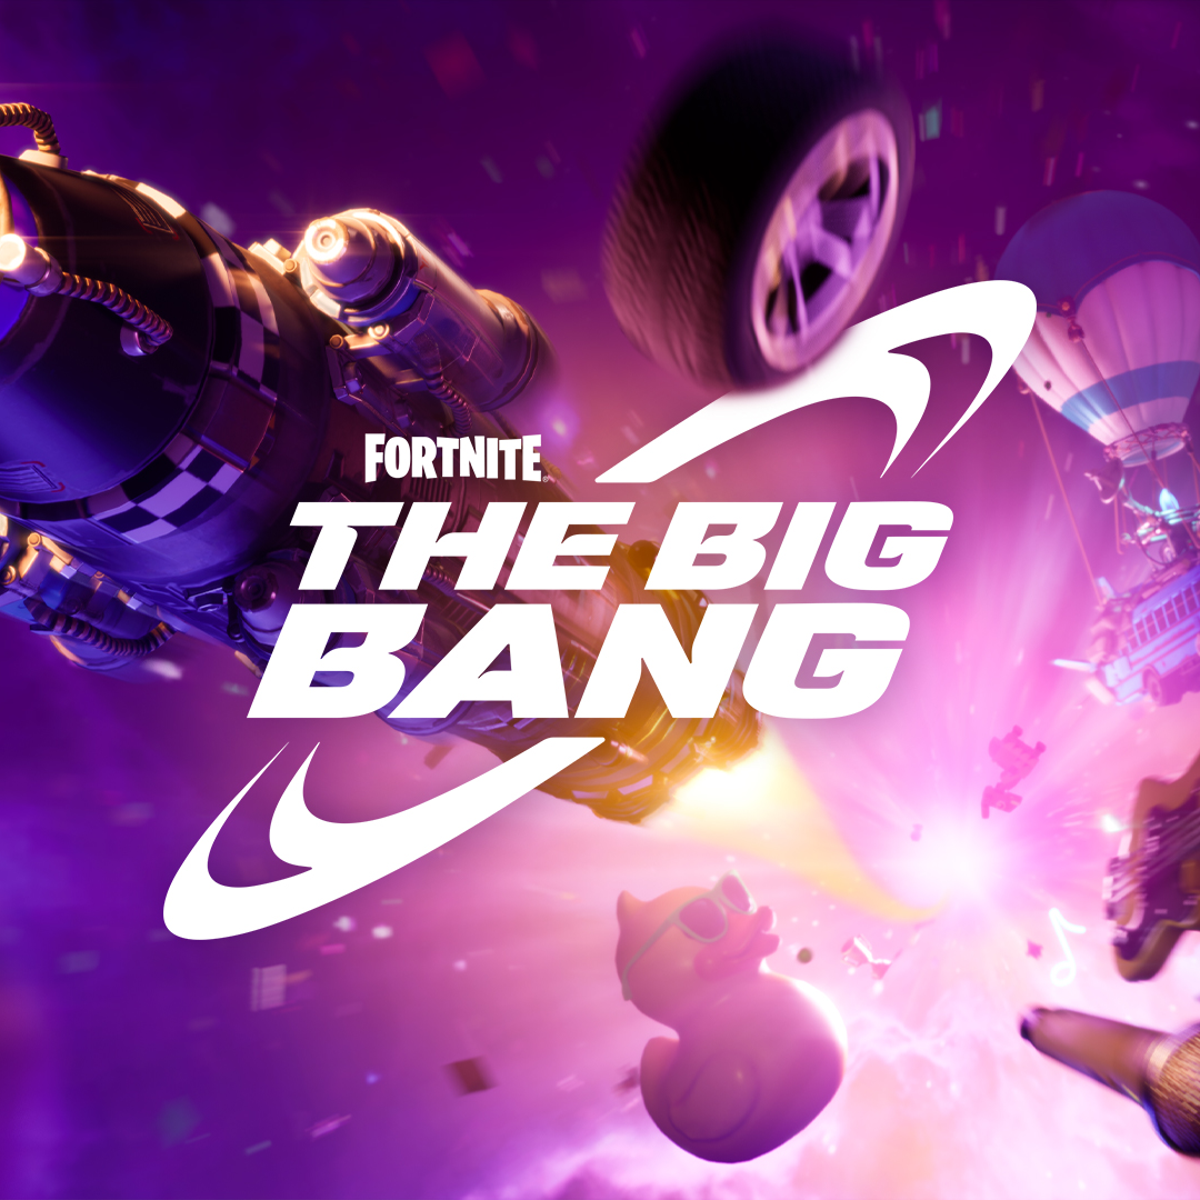 Fortnite dates The Big Bang live event, as leaks suggest a huge music star will appear - Eurogamer.net (Picture 1)